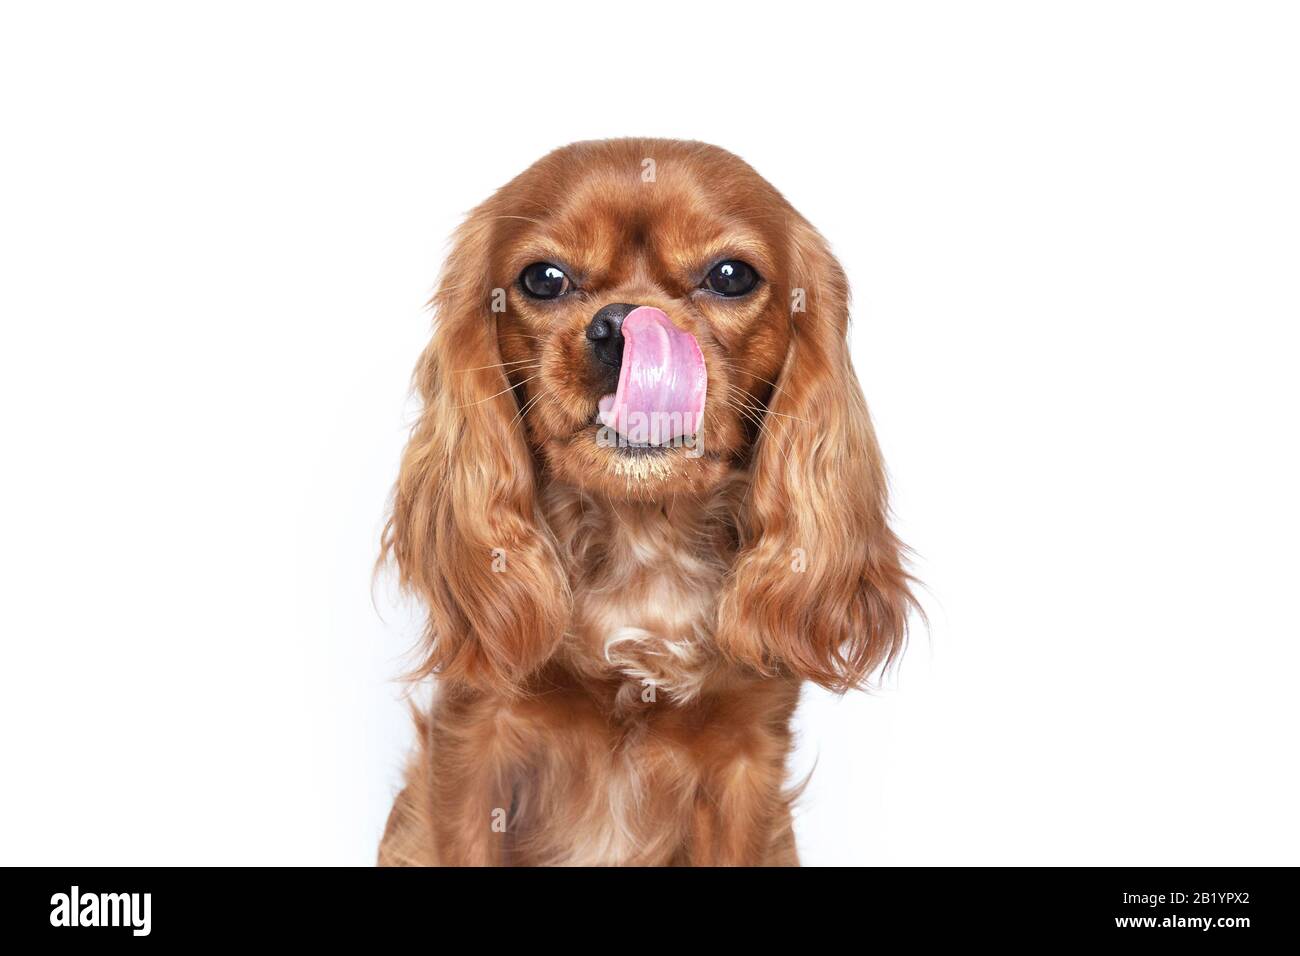 Portrait of cute dog with tongue out isolated on white background Stock Photo